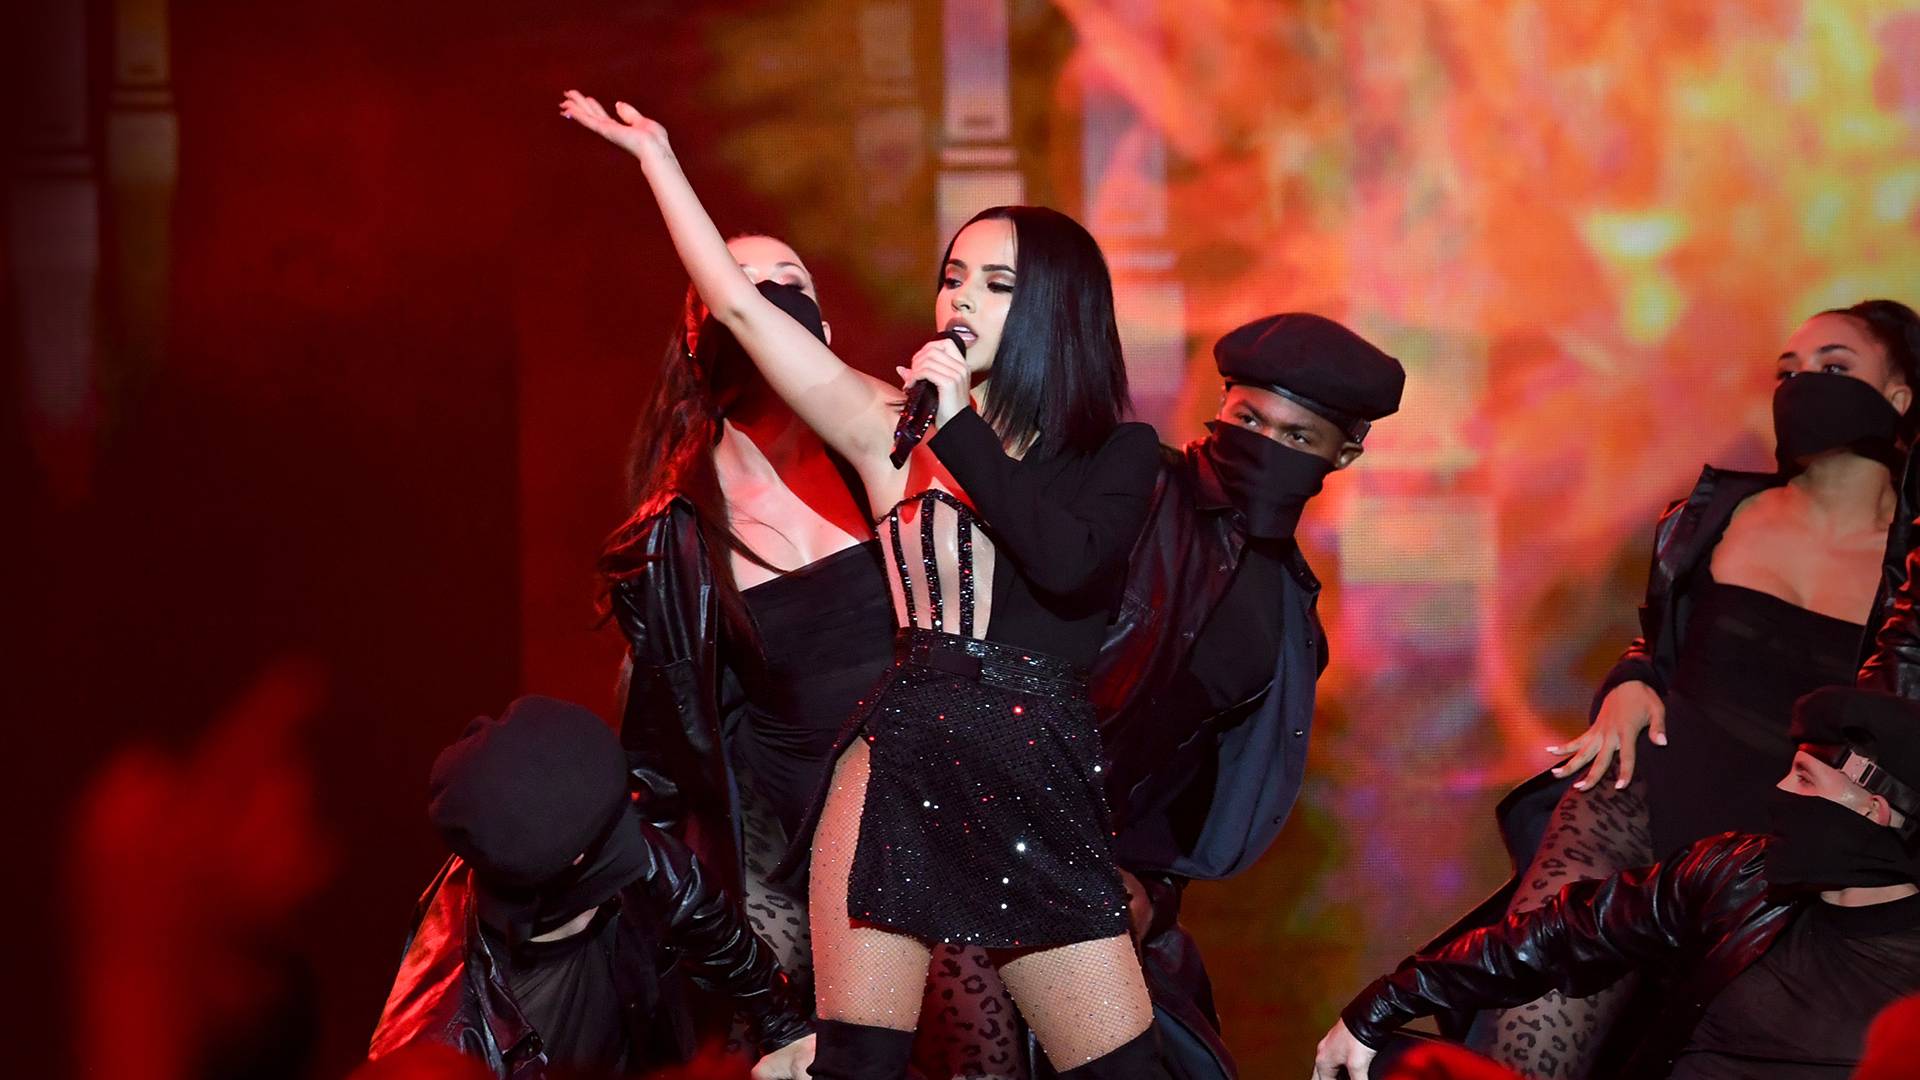 Host Becky G sets aside her emcee duties to perform her songs "24/7," "Sin Pijama" and "Mayores" at the 2019 MTV EMAs.